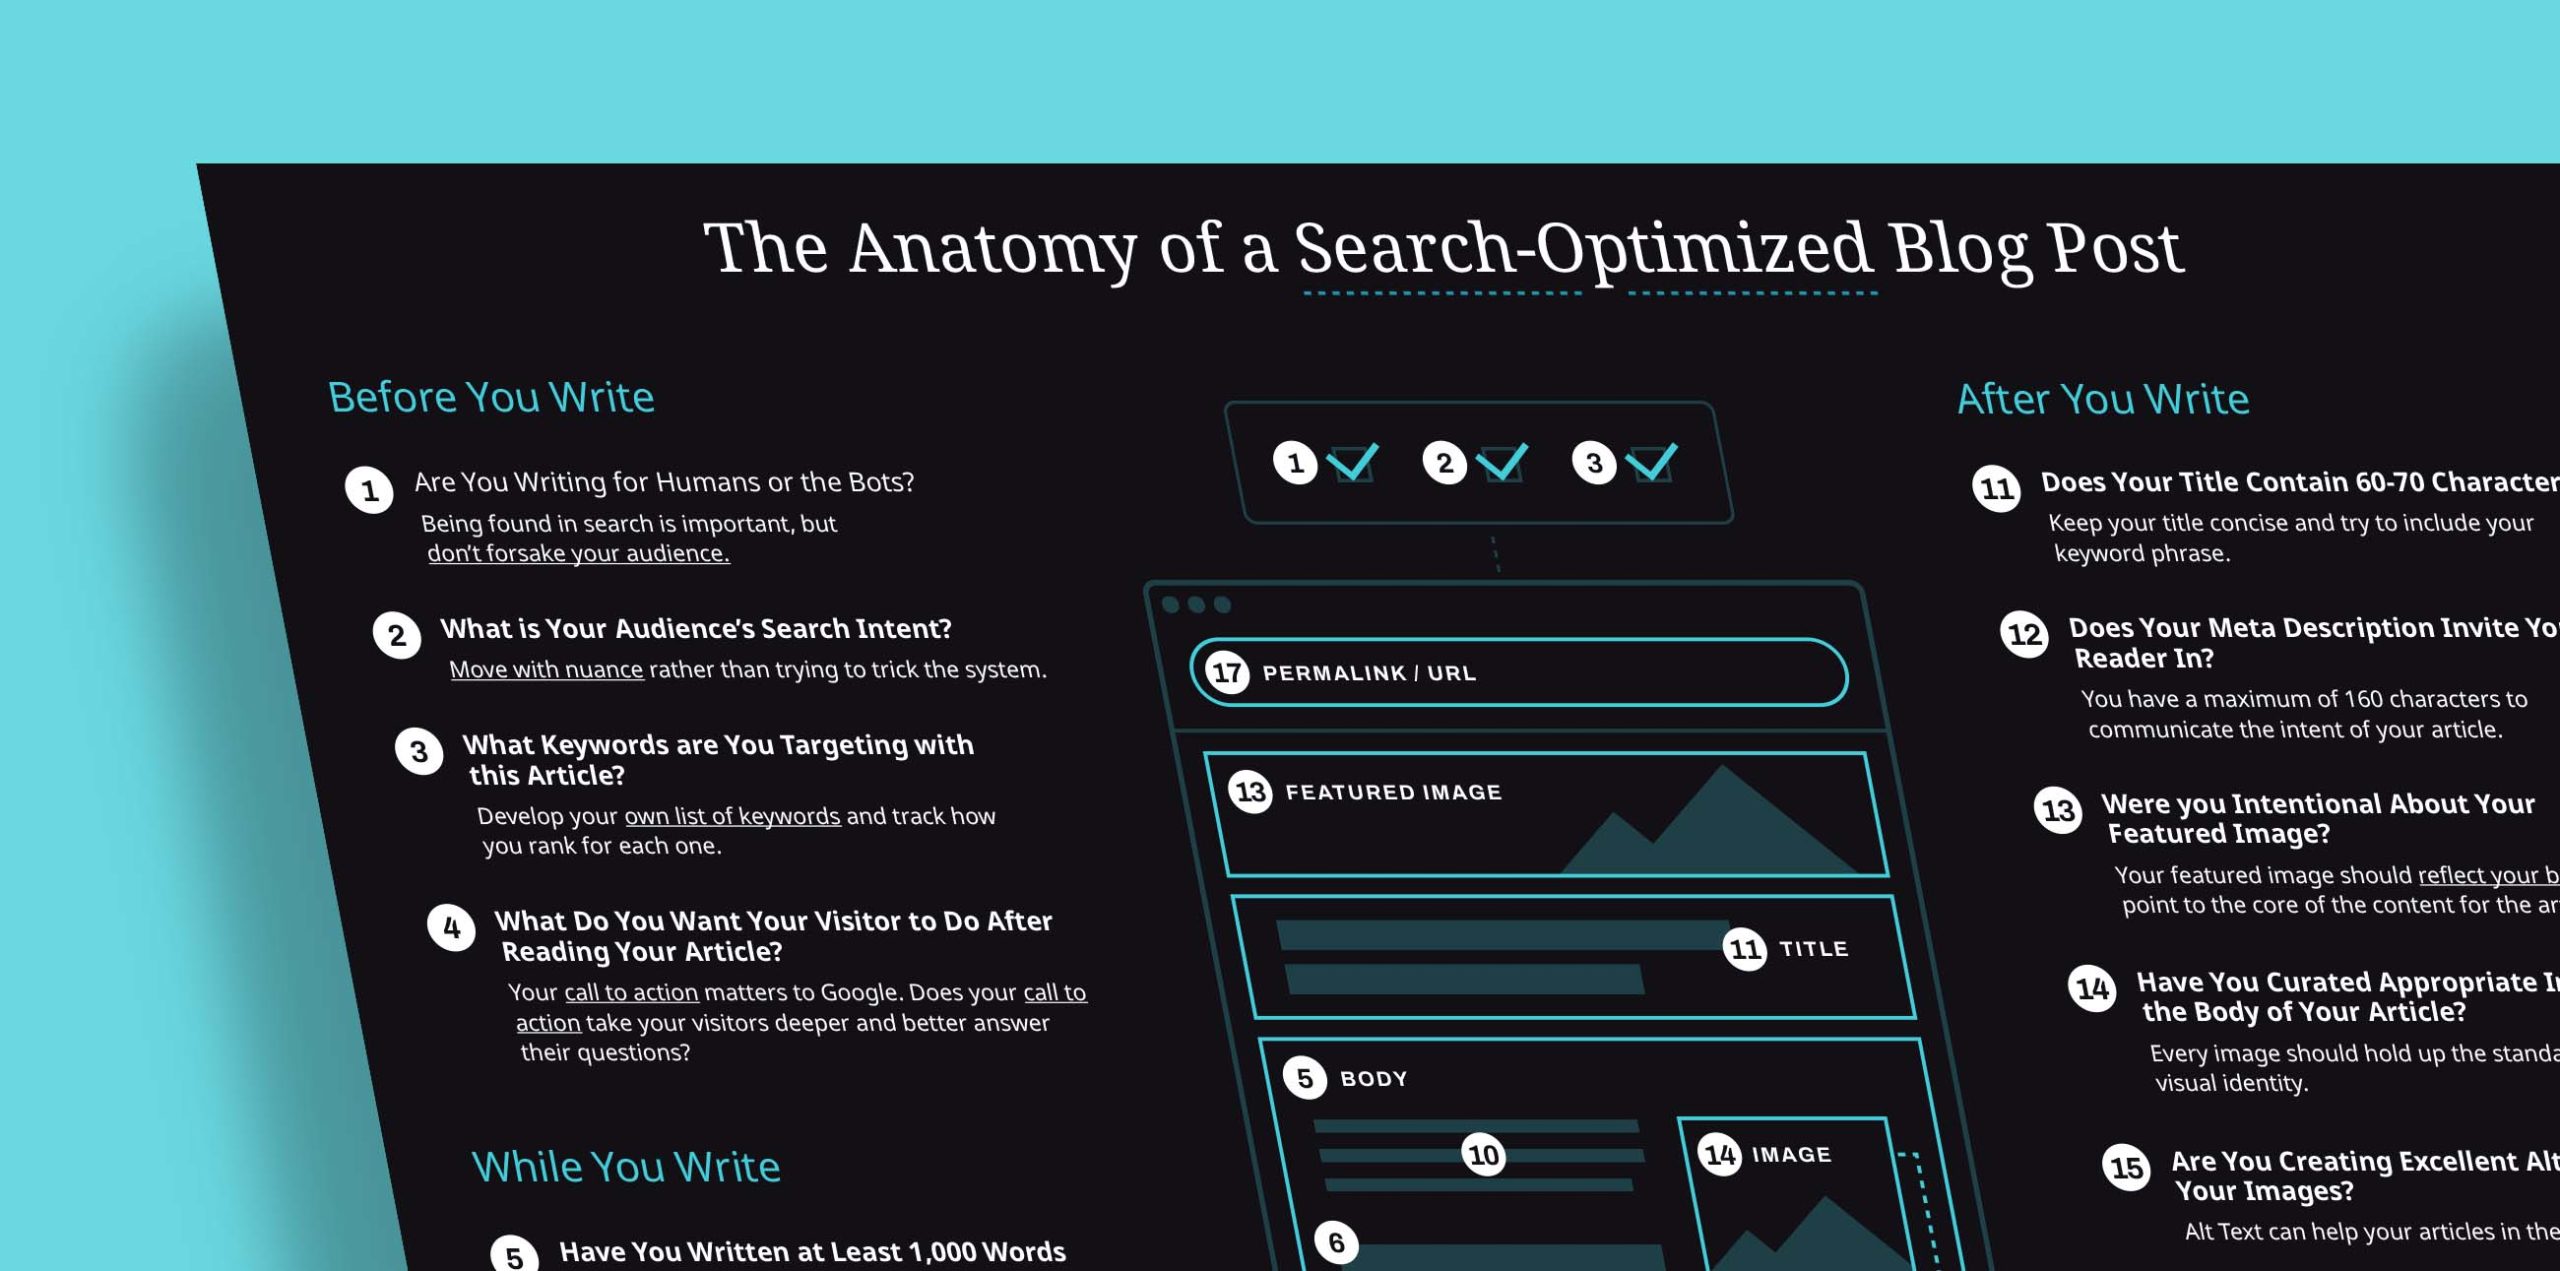 Portion of Golden Spiral's The Anatomy of a Search-Optimized Blog Post Infographic